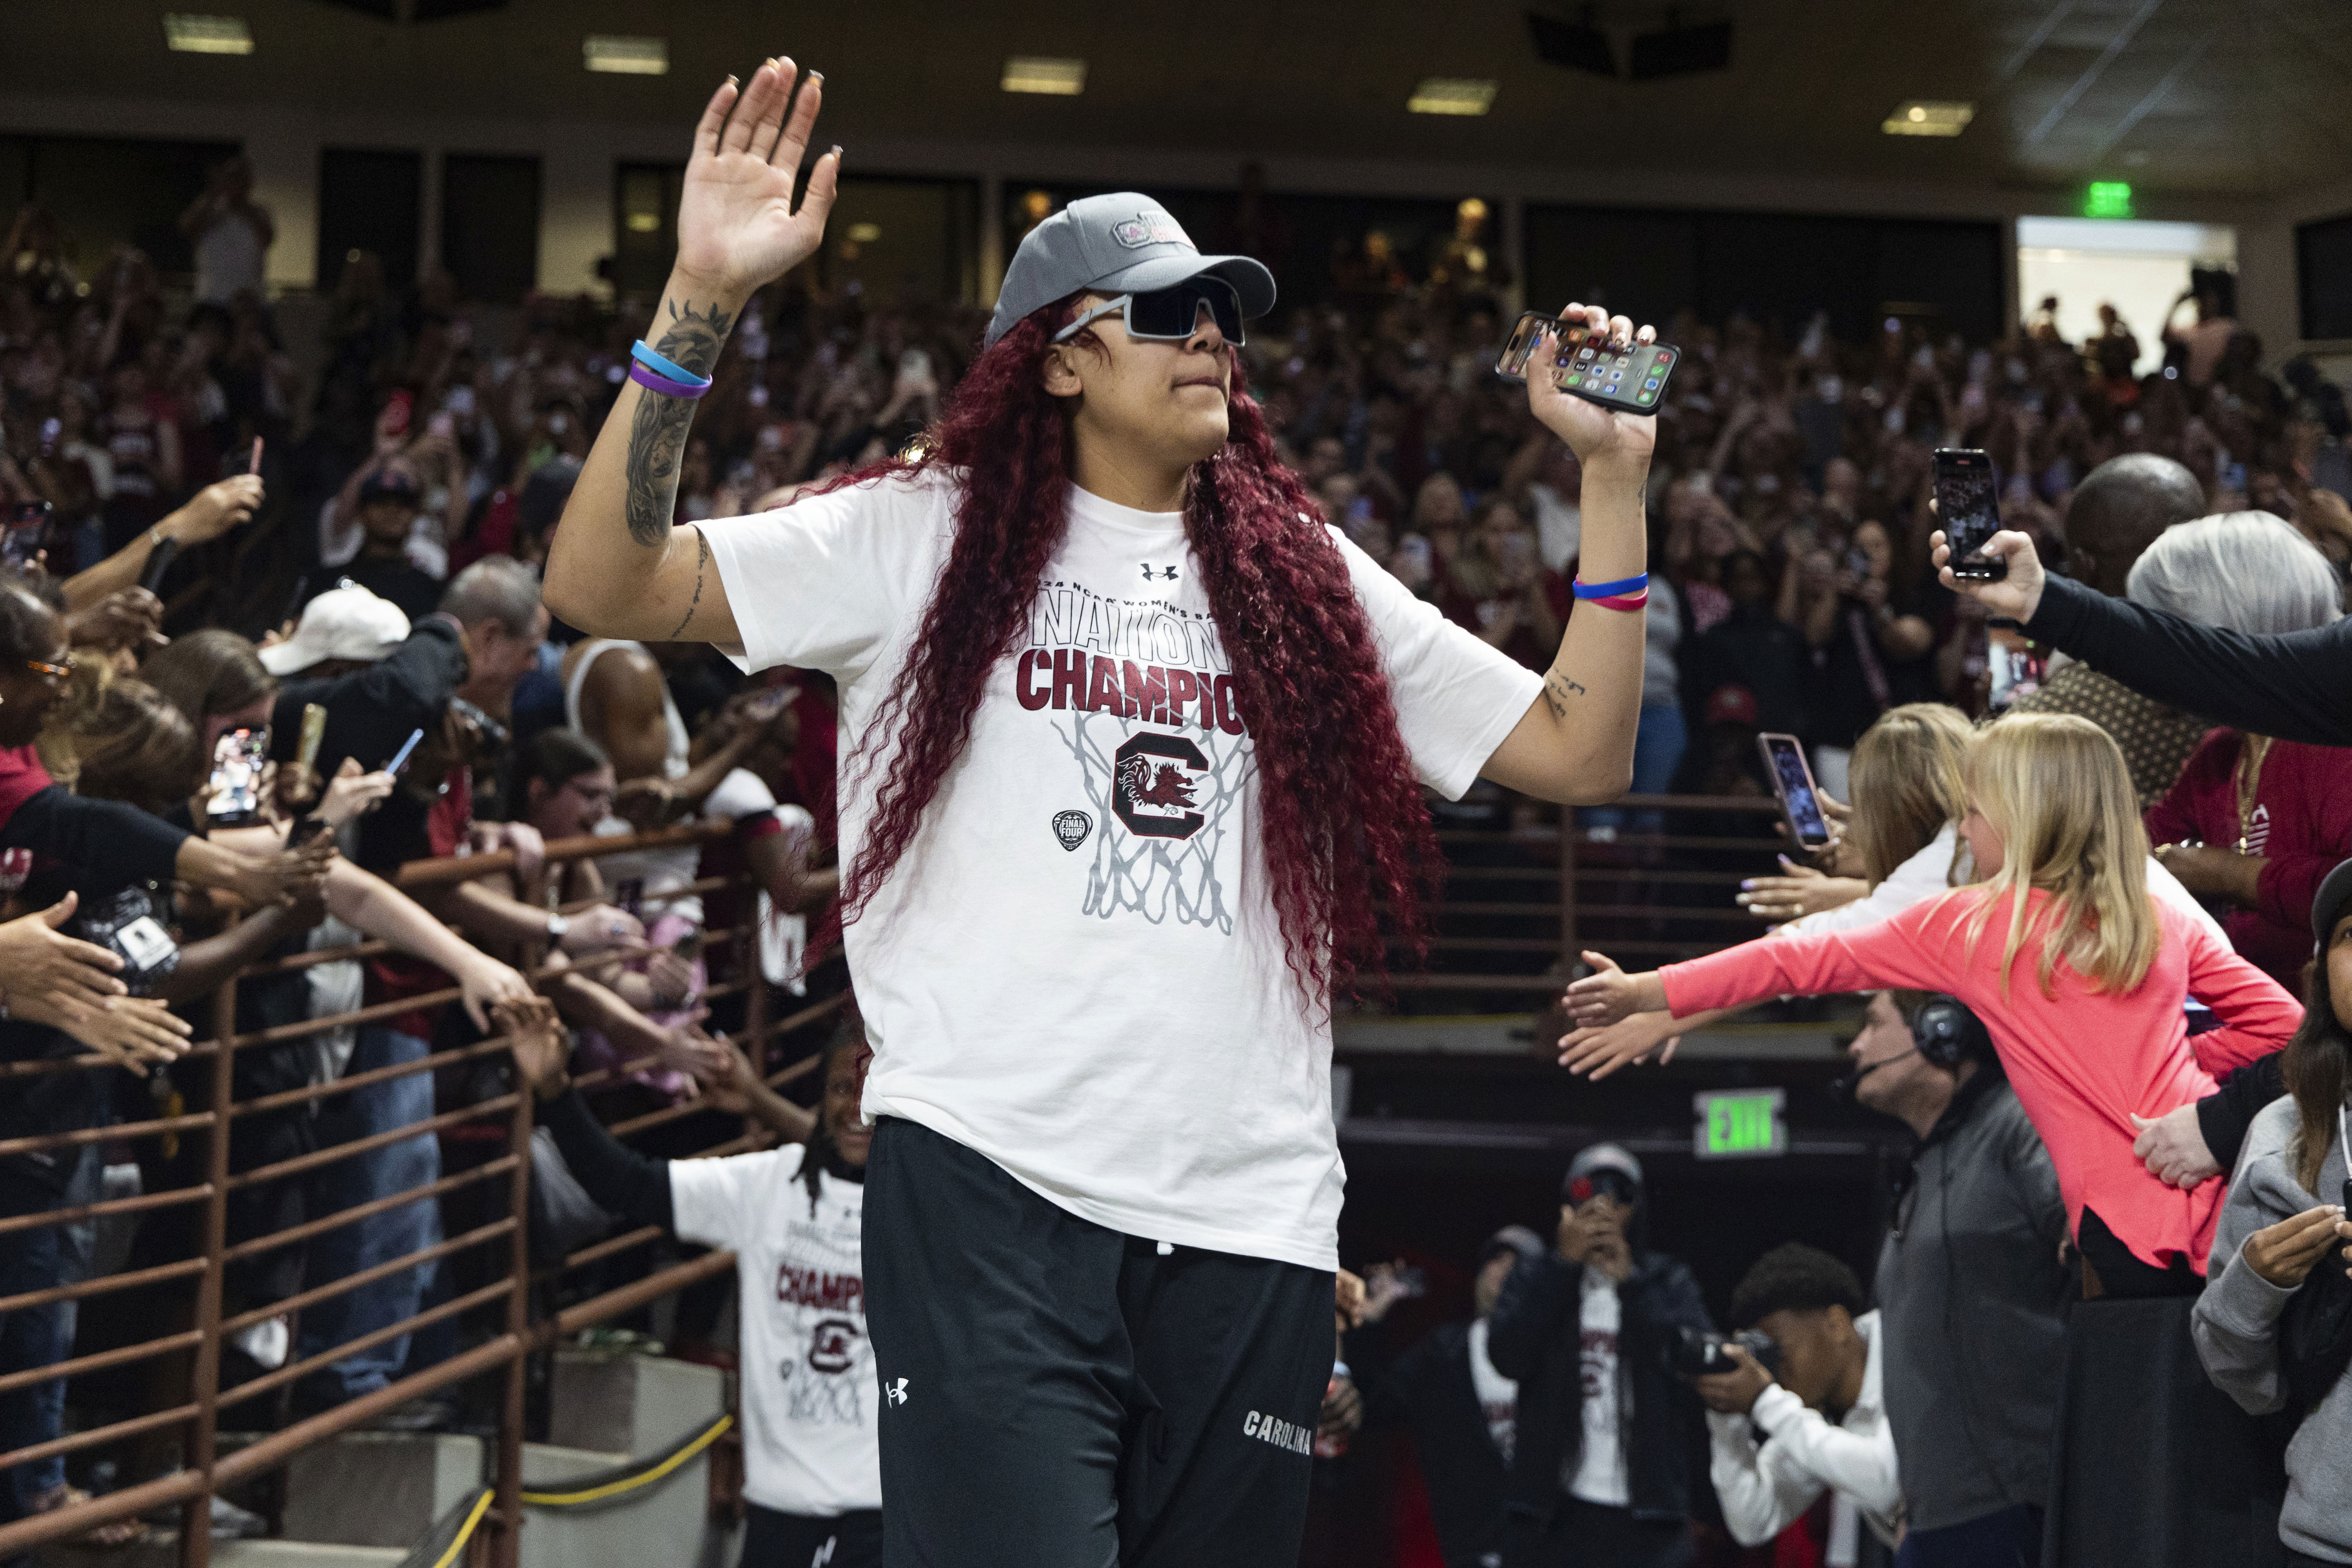 dawn staley and her ncaa champion south carolina gamecocks celebrated with parade and rally